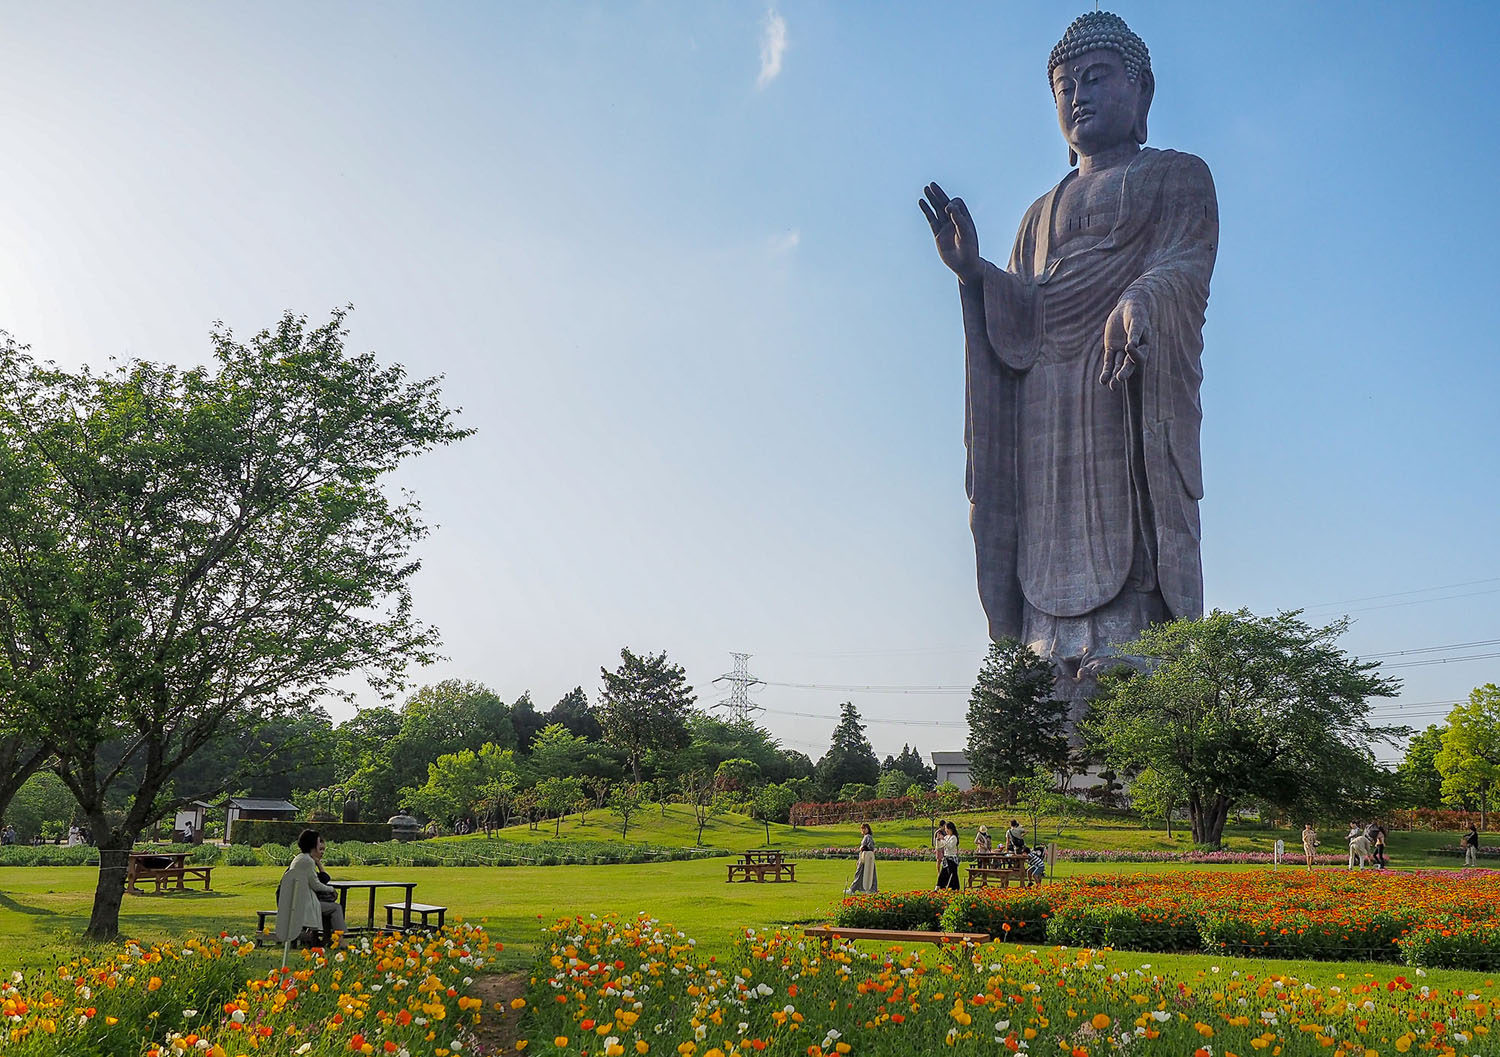 List of top 10 tallest statues in the world